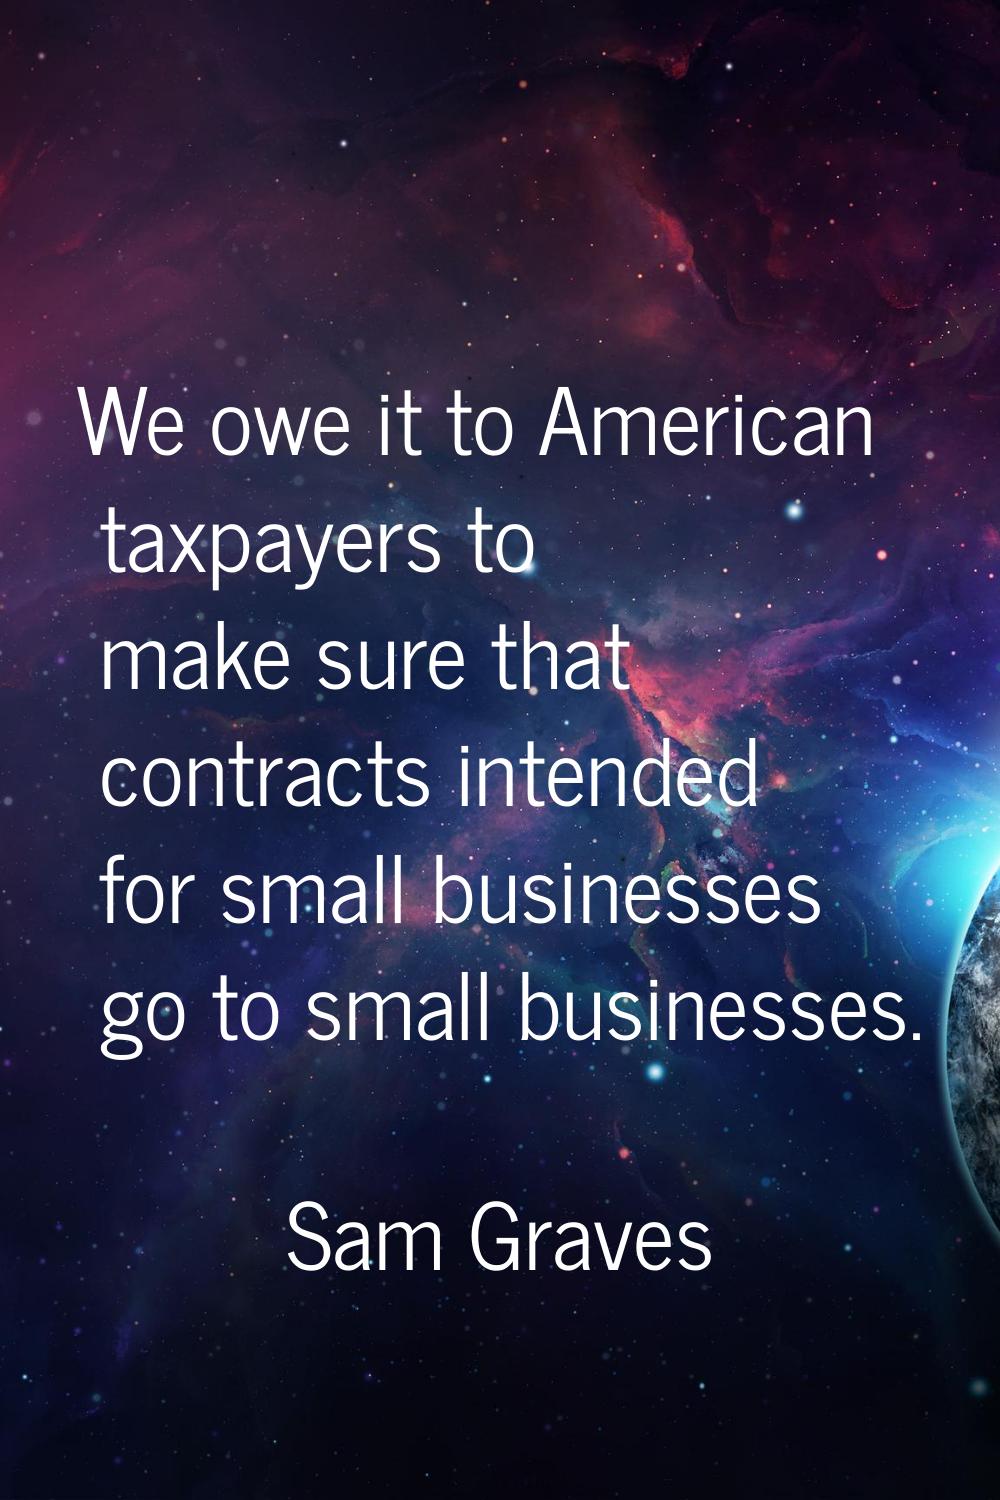 We owe it to American taxpayers to make sure that contracts intended for small businesses go to sma